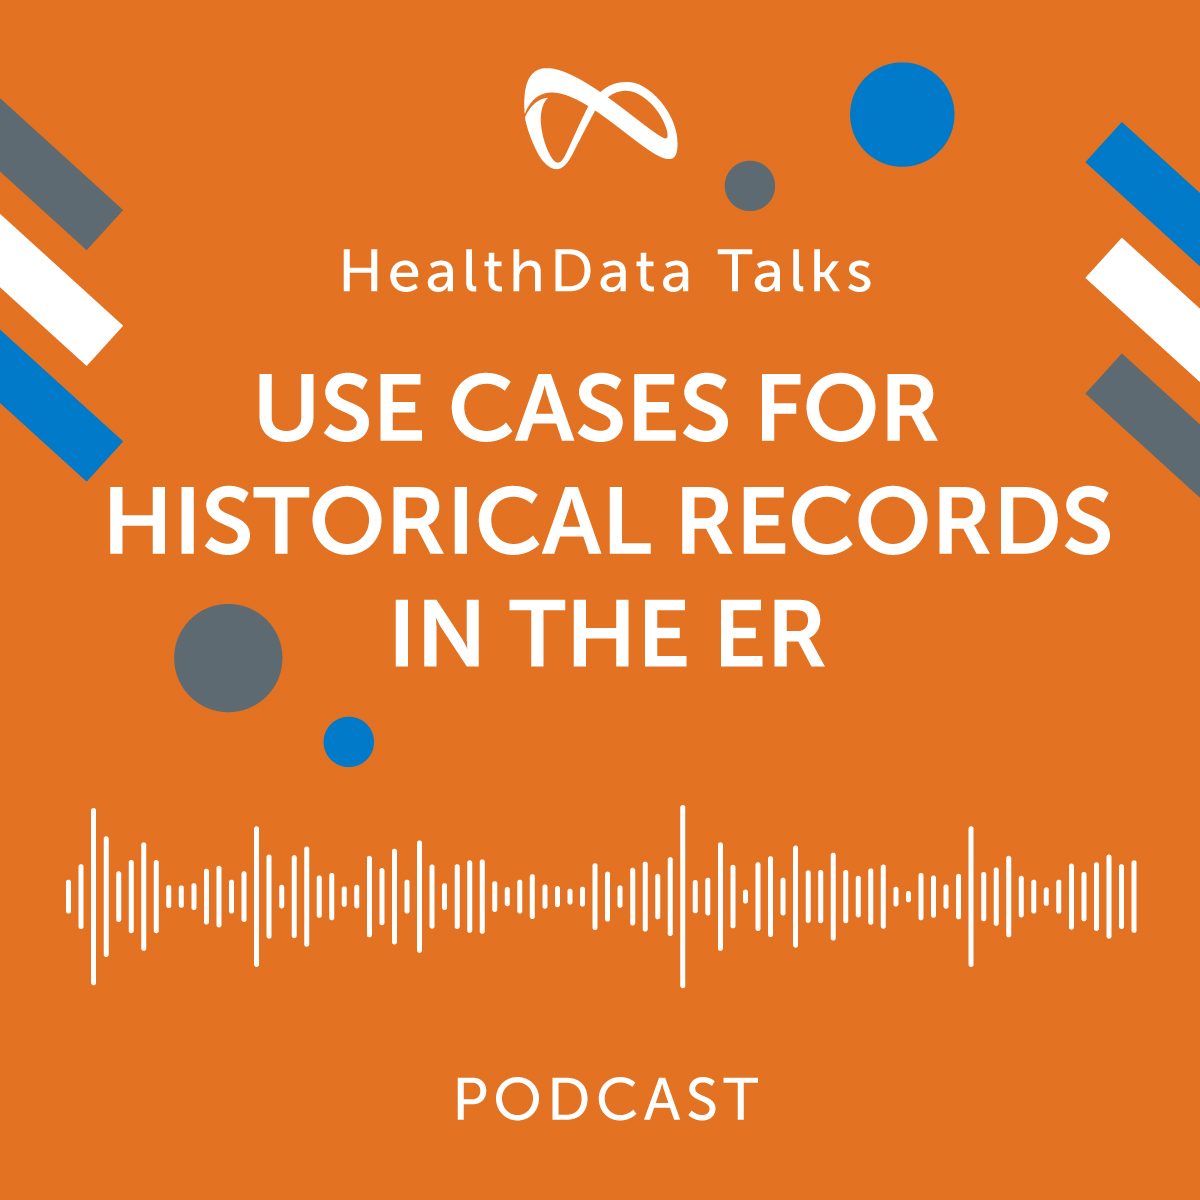 Use Cases for Historical Records in the ER